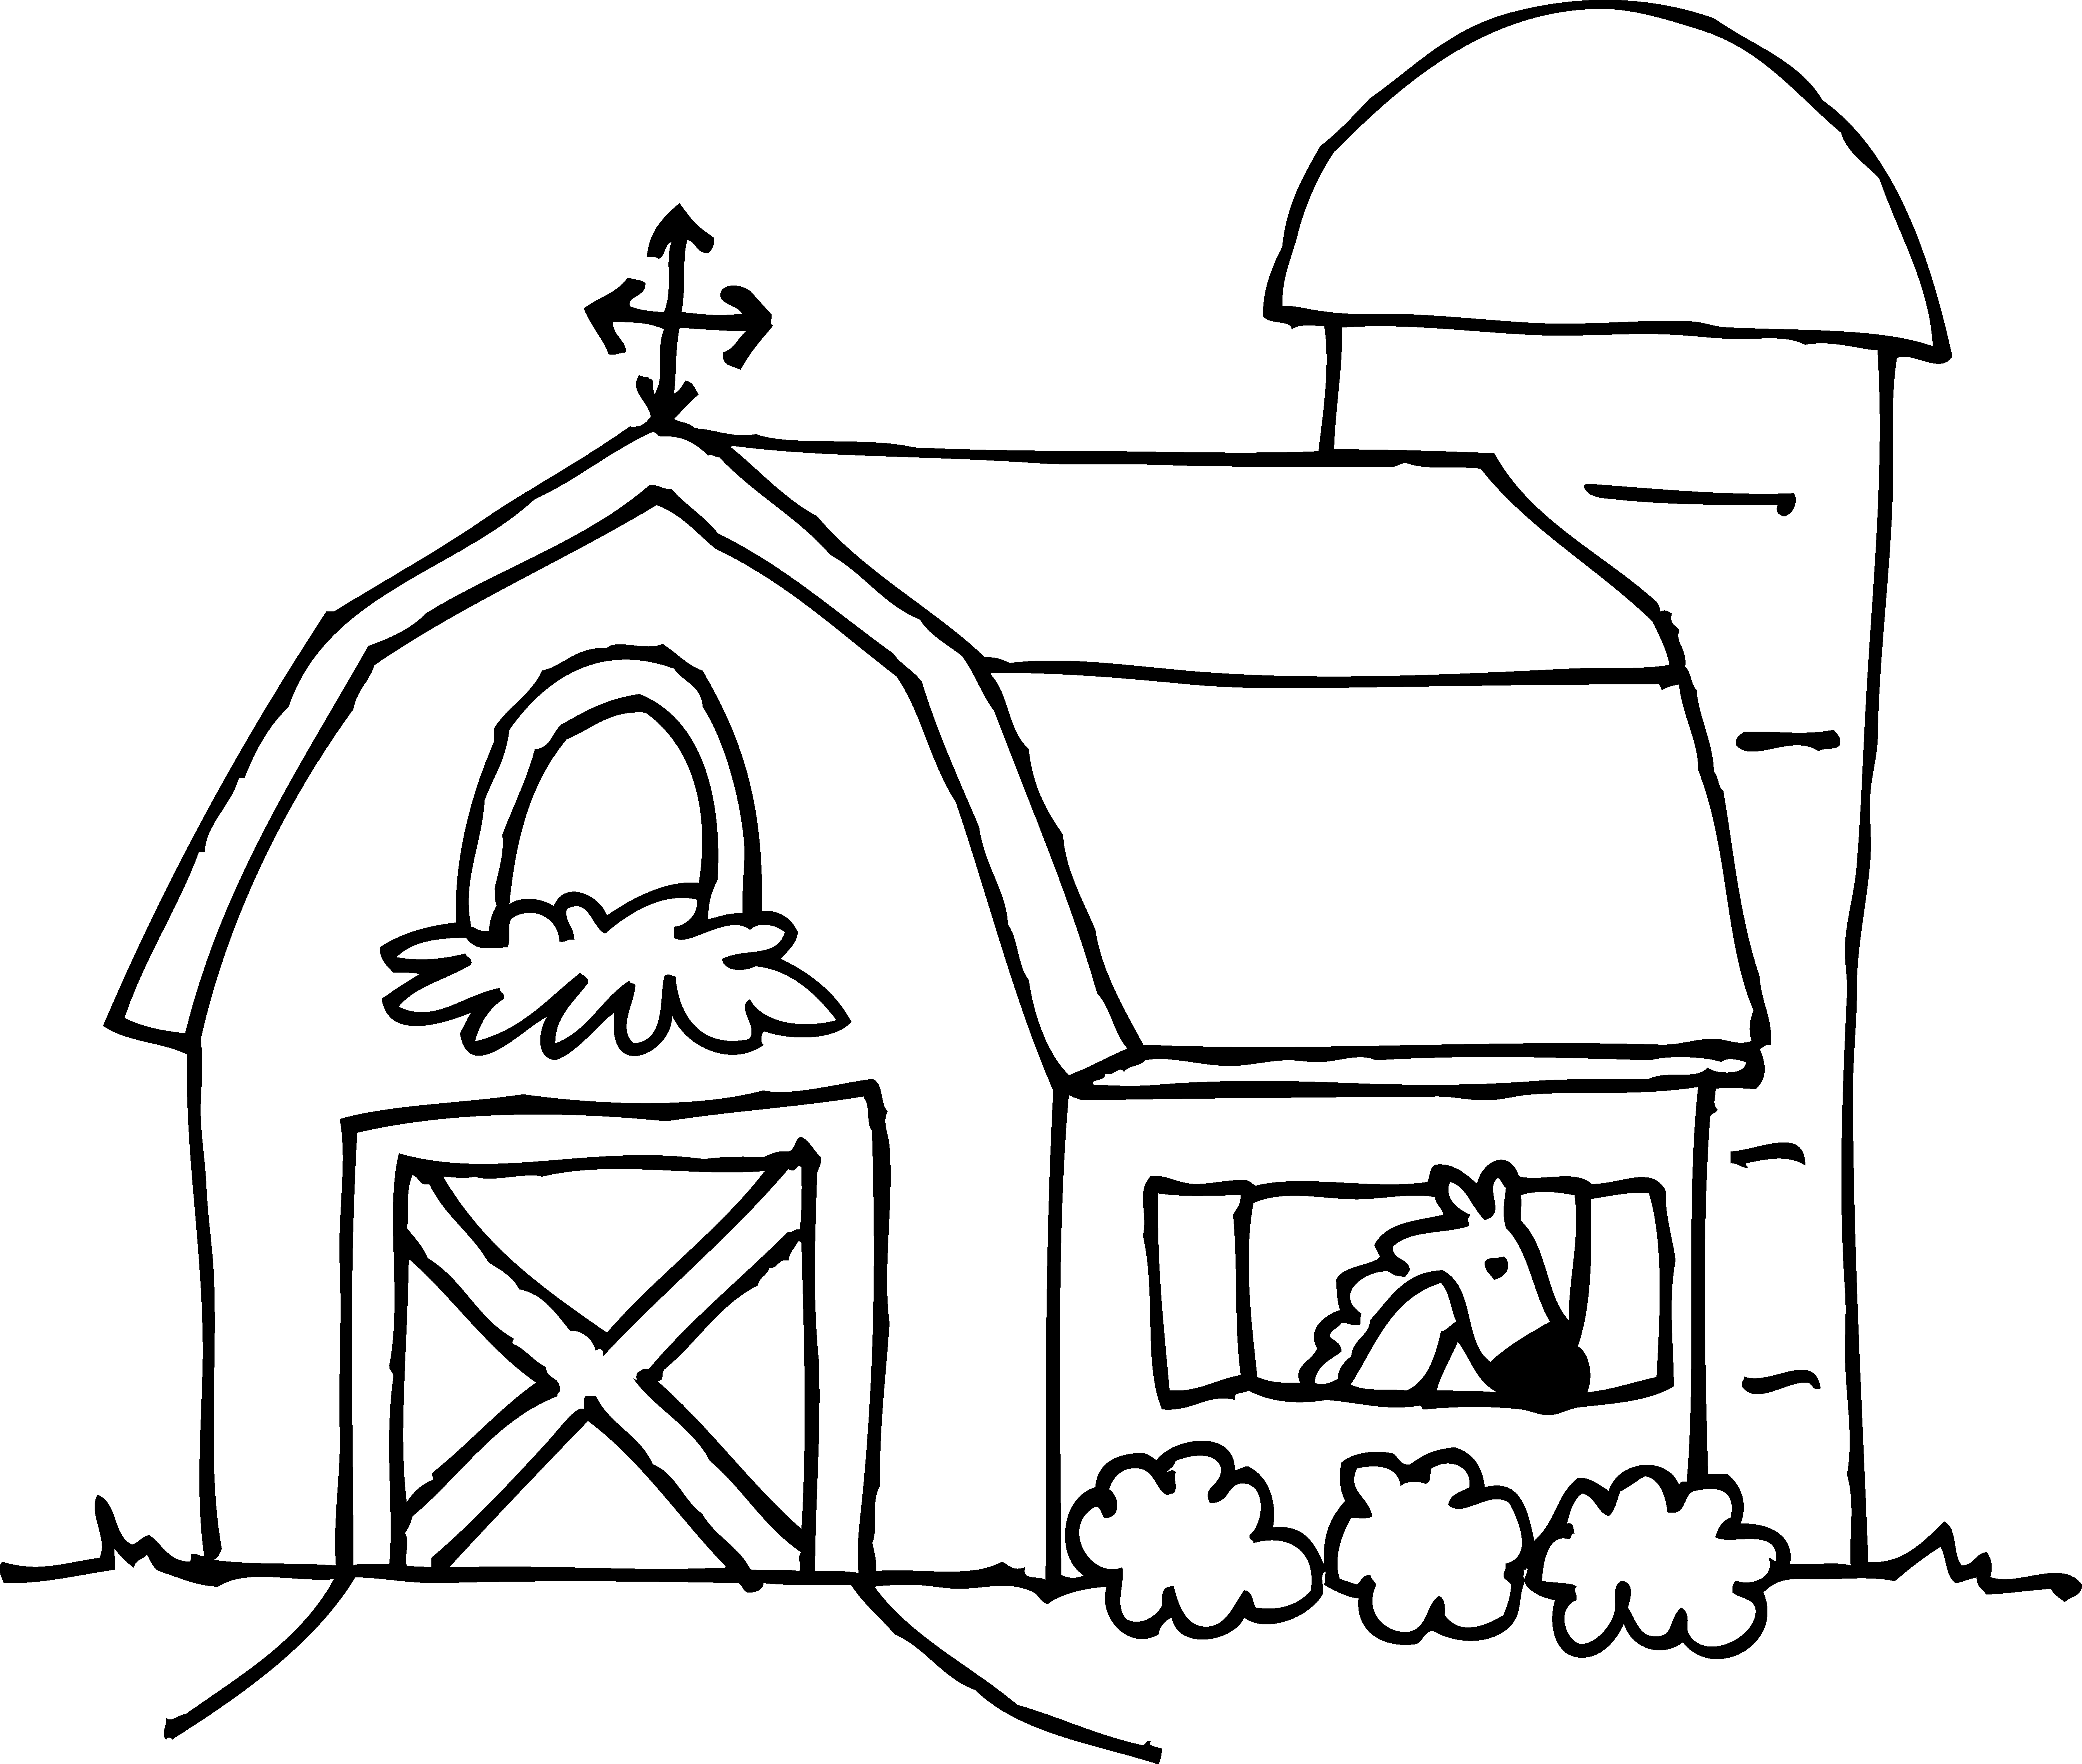 Cute barn coloring page free clip art